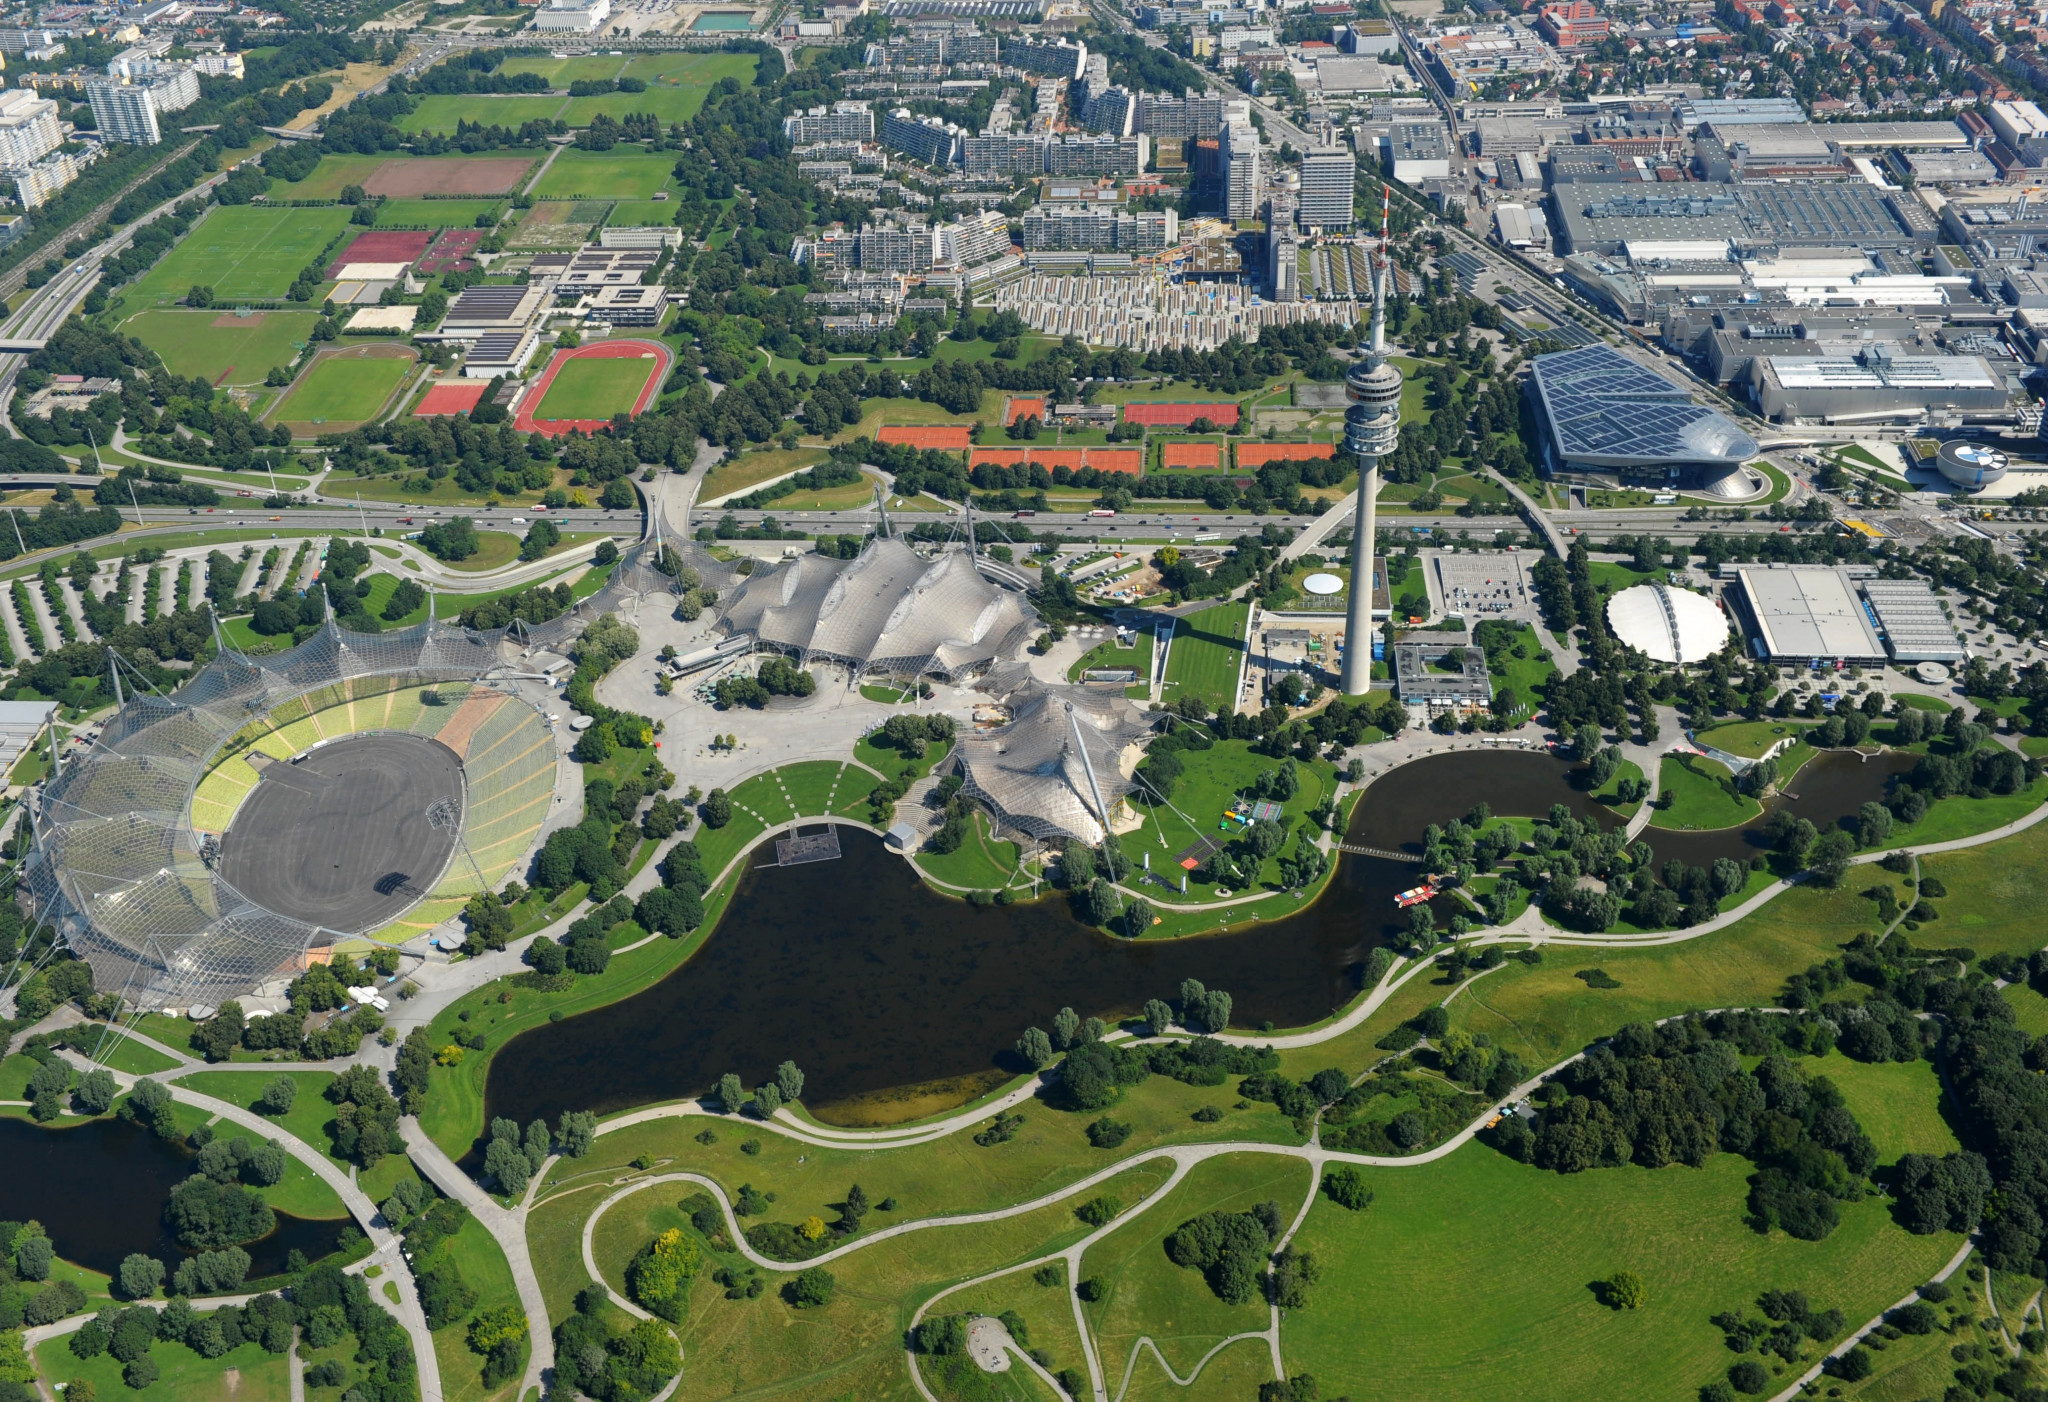 The Olympiapark in Munich is set to serve as the main venue for the European Championships ©Getty Images